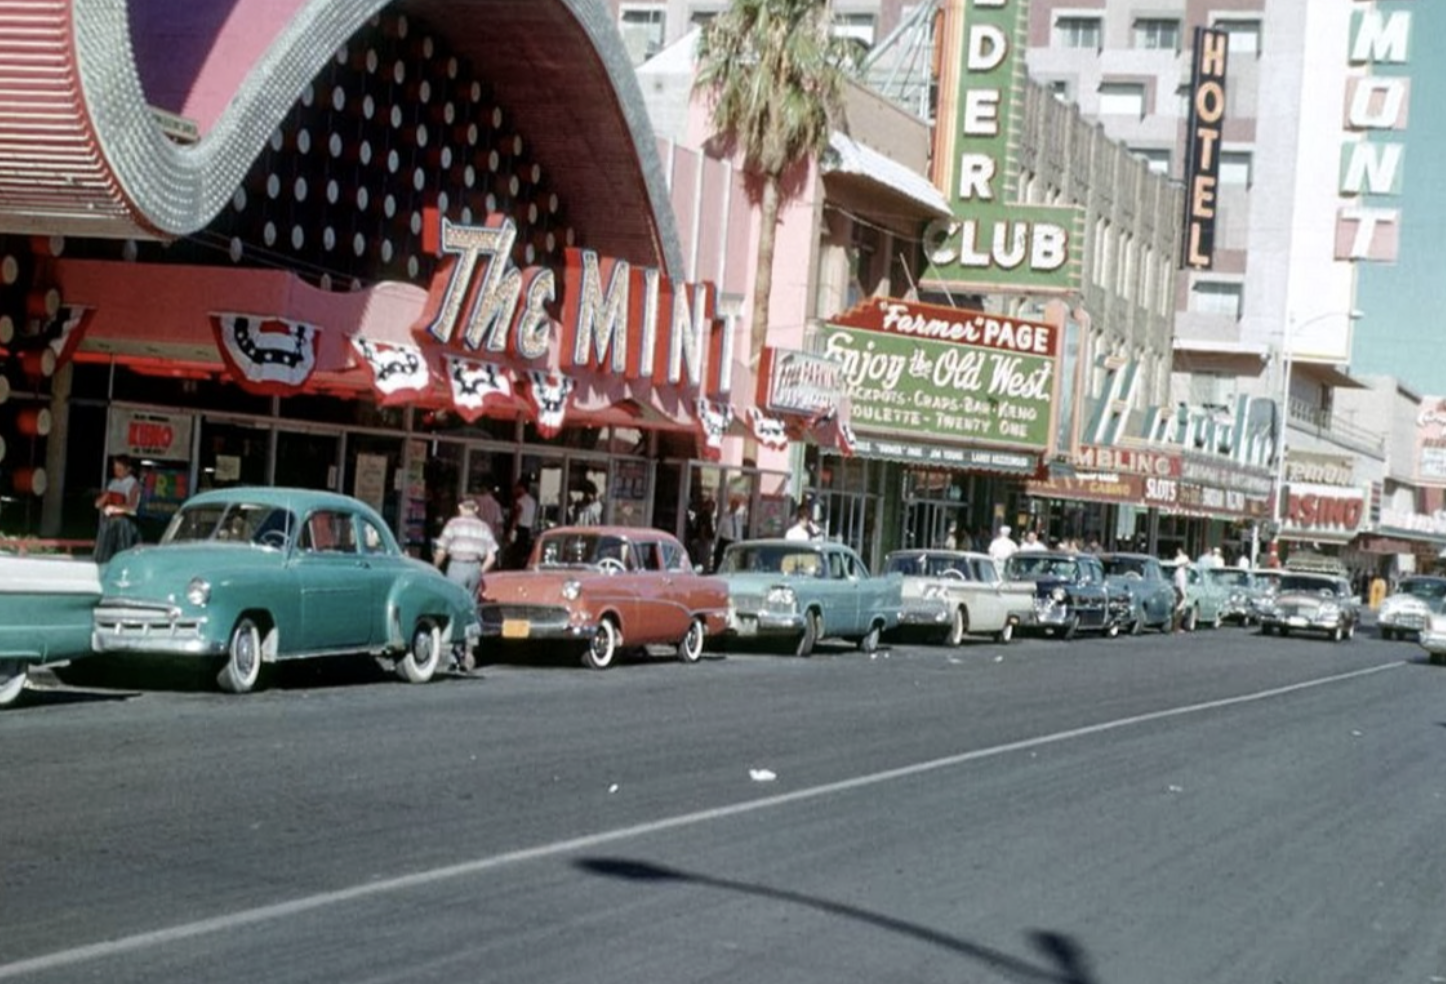 24 Photos of Old Vegas to Have You Longing For $5.00 Prime Rib